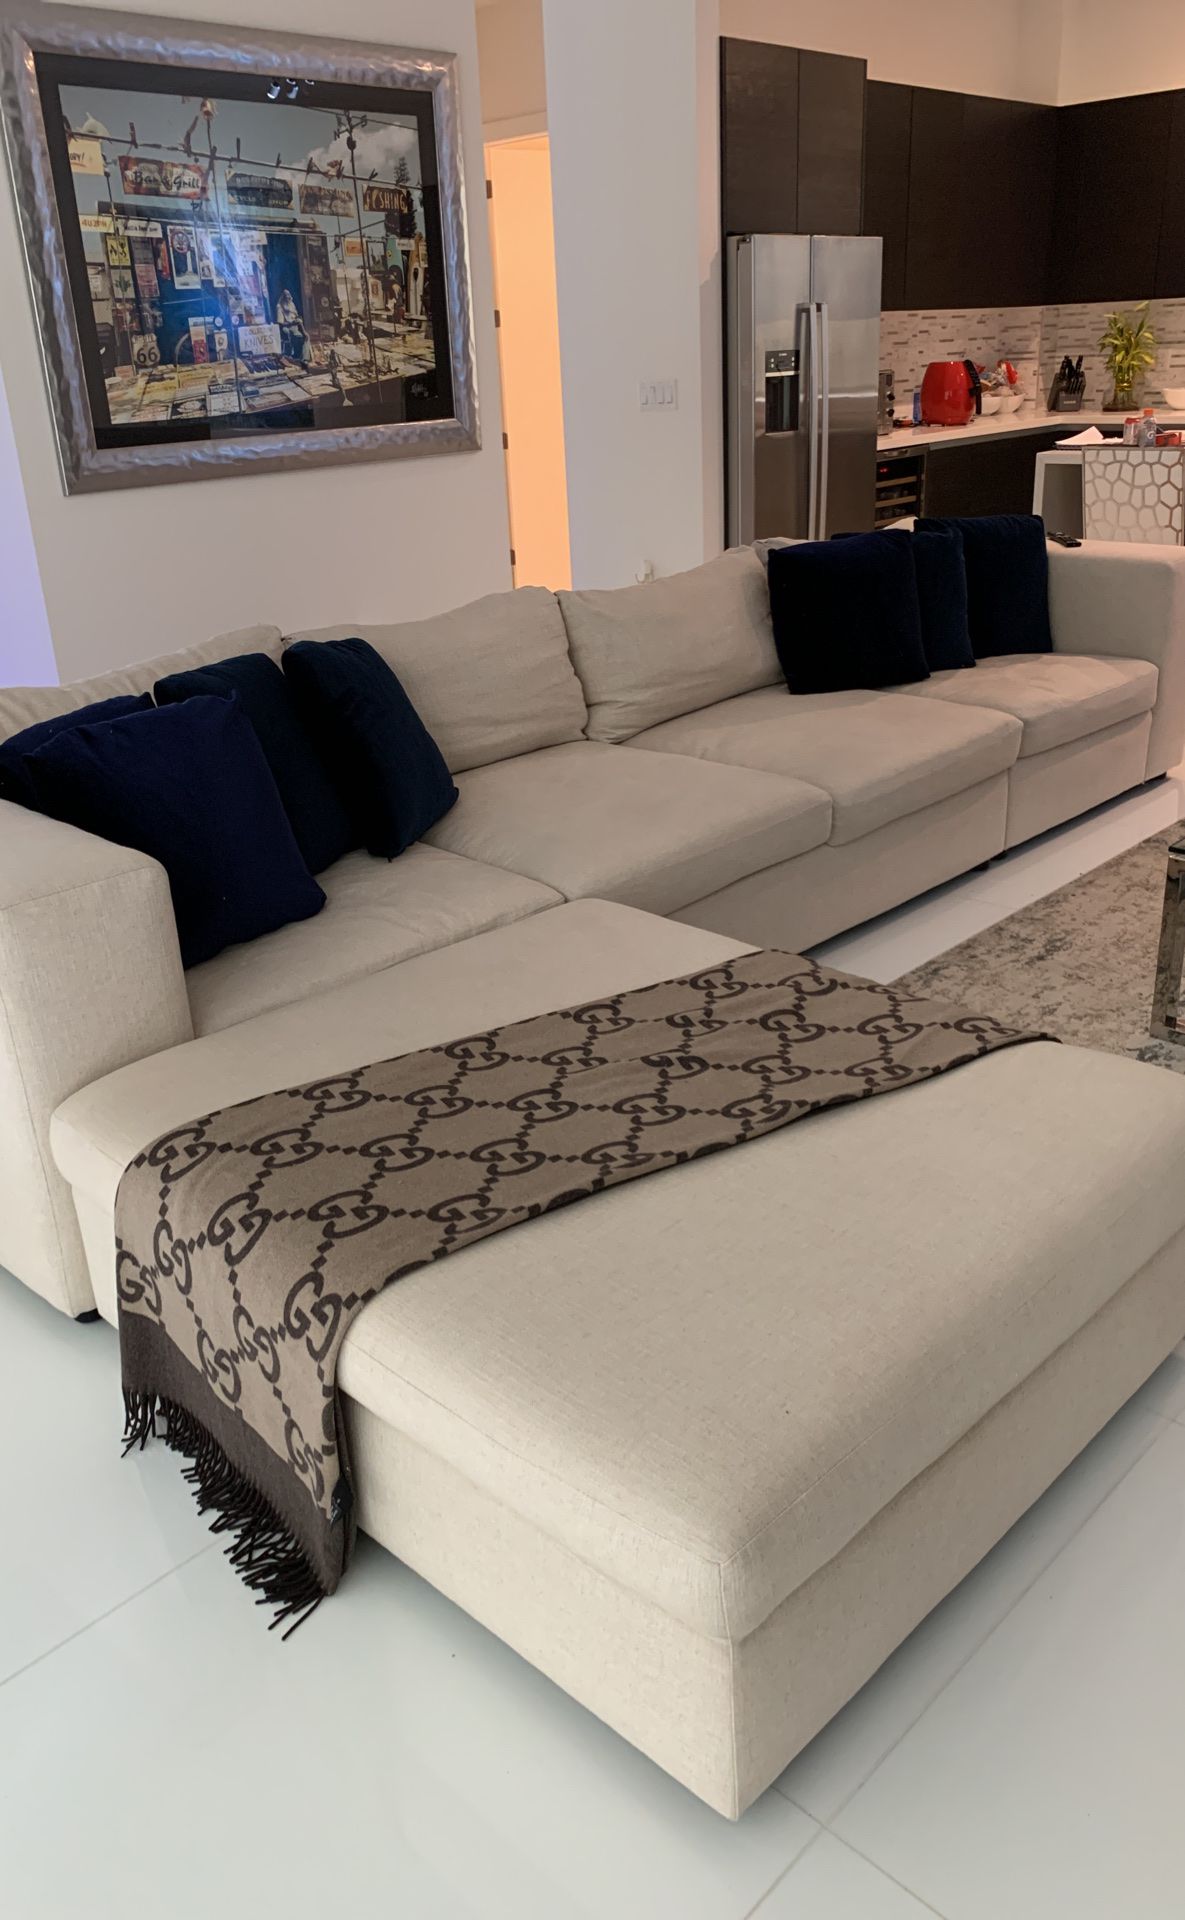 Used Bernhardt sectional couch